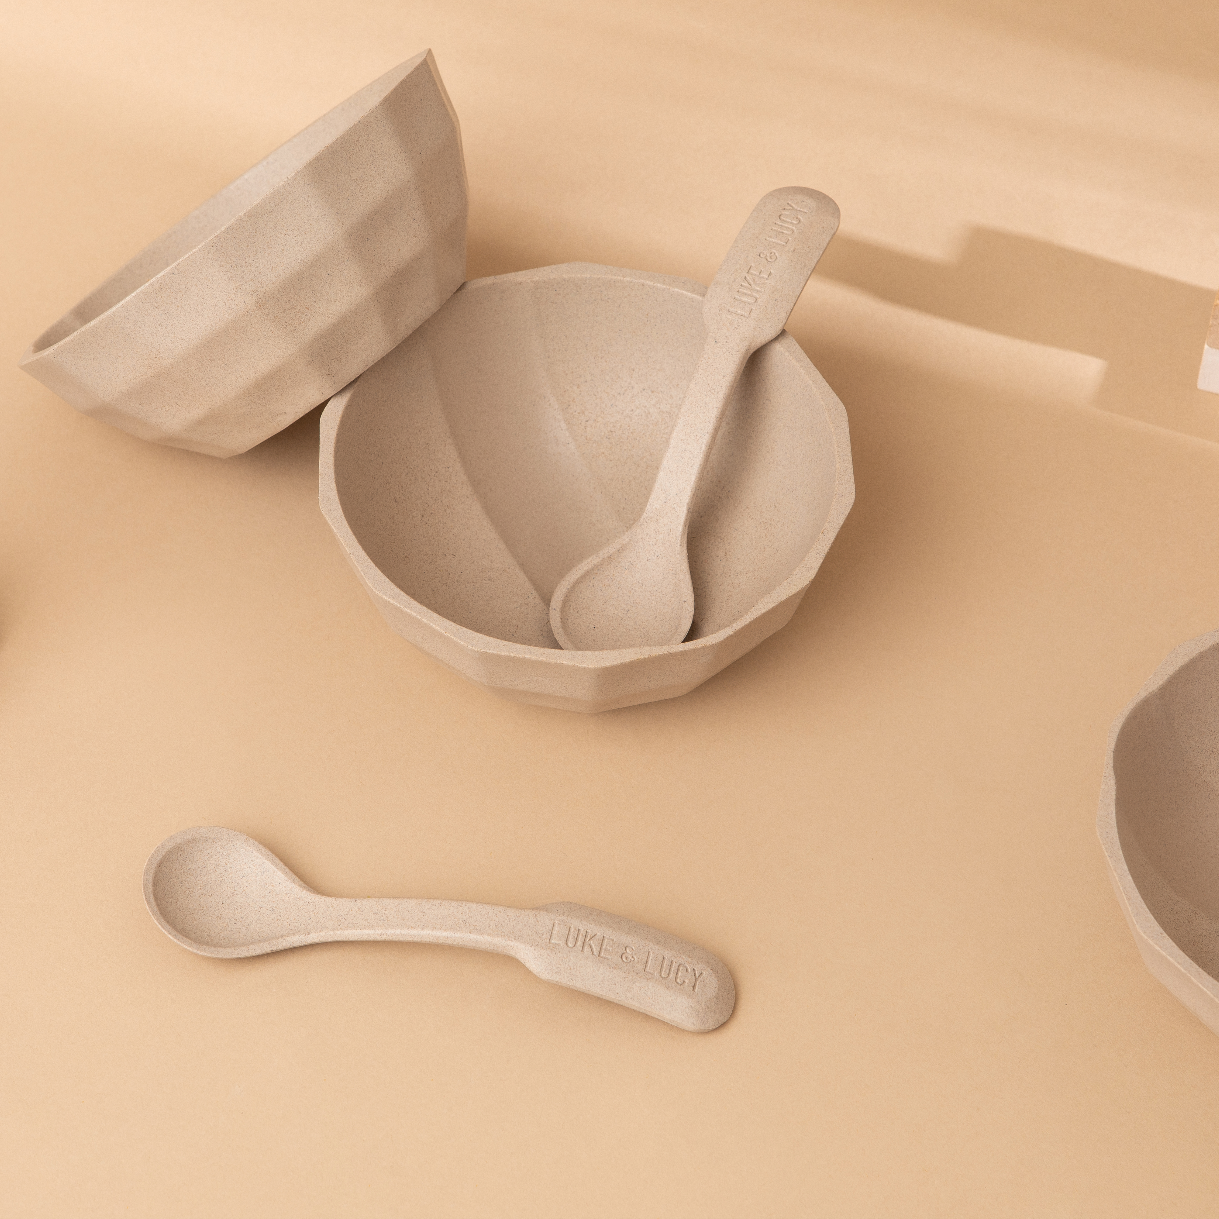 Channel Bowl Mini and Pairing Spoon | Limited Mobility or Dexterity